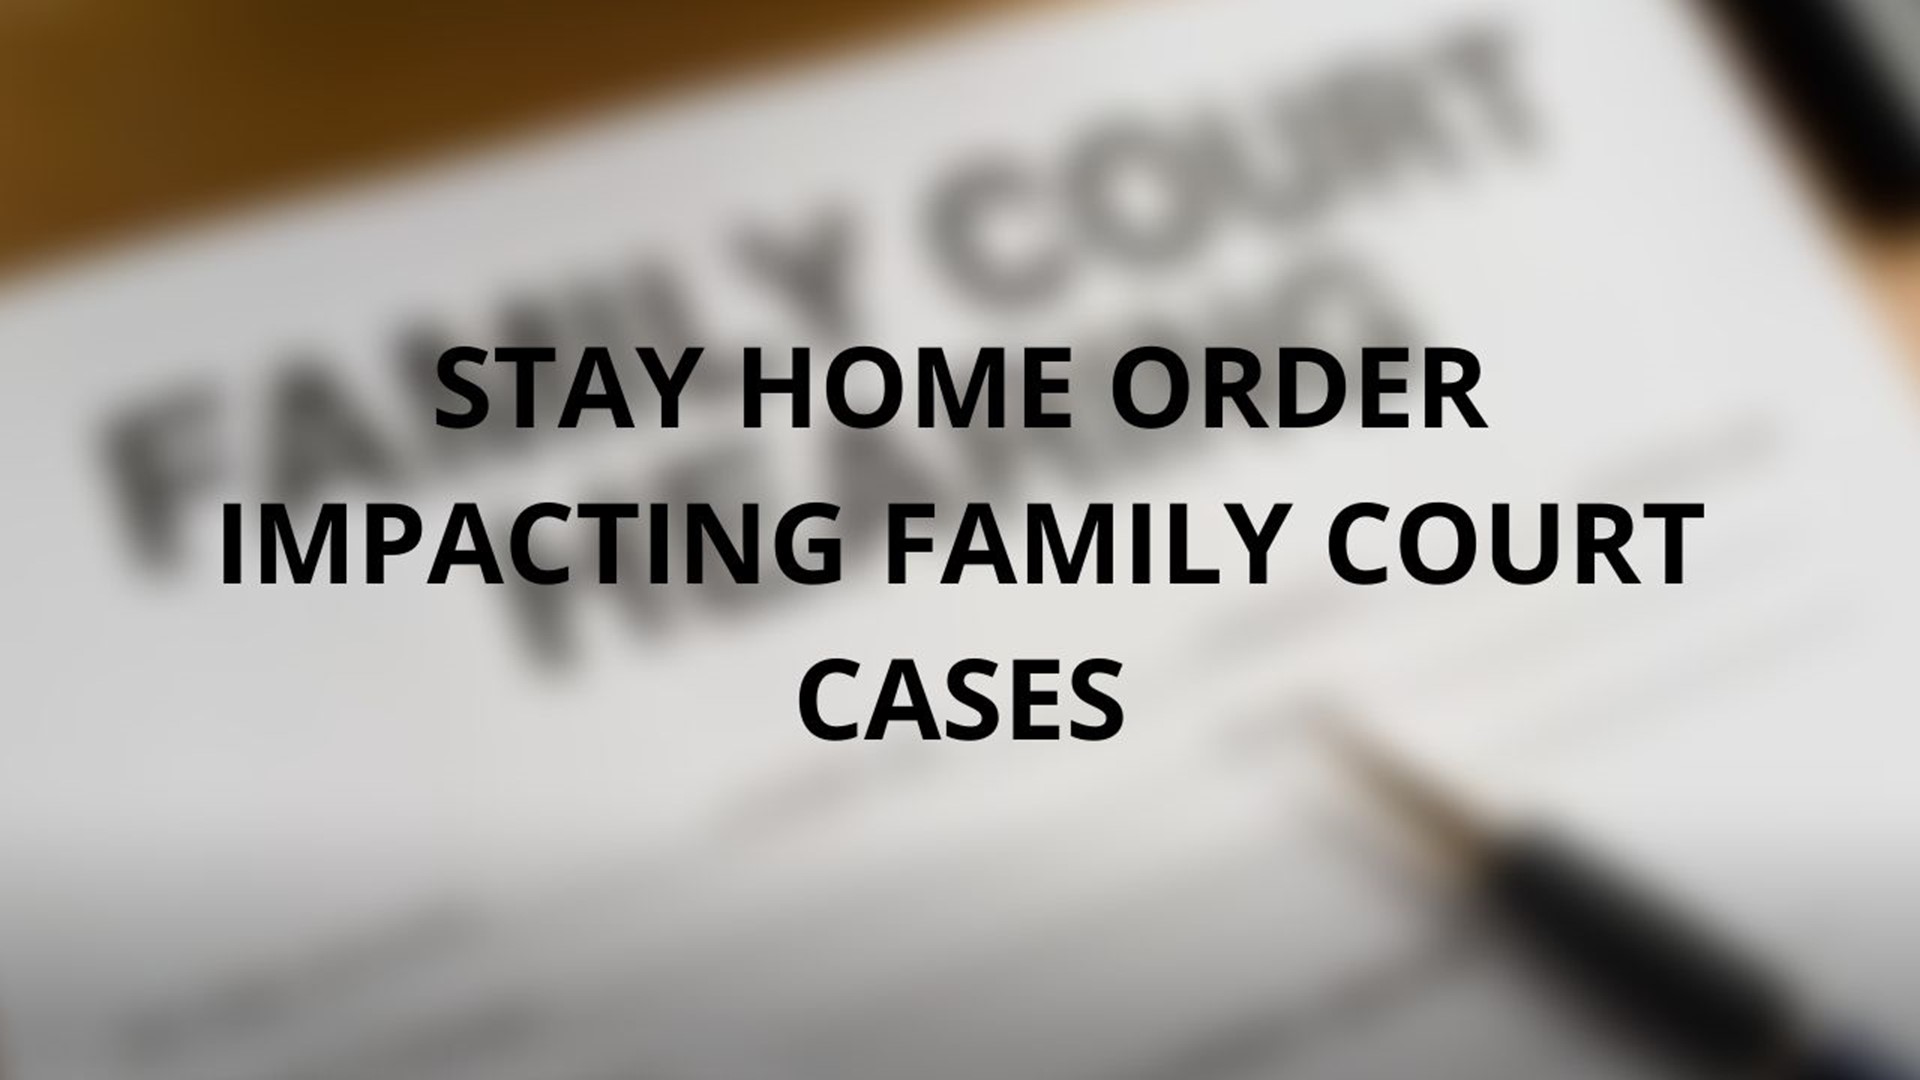 Family court cases are being impacted by Oregon’s stay-home order.